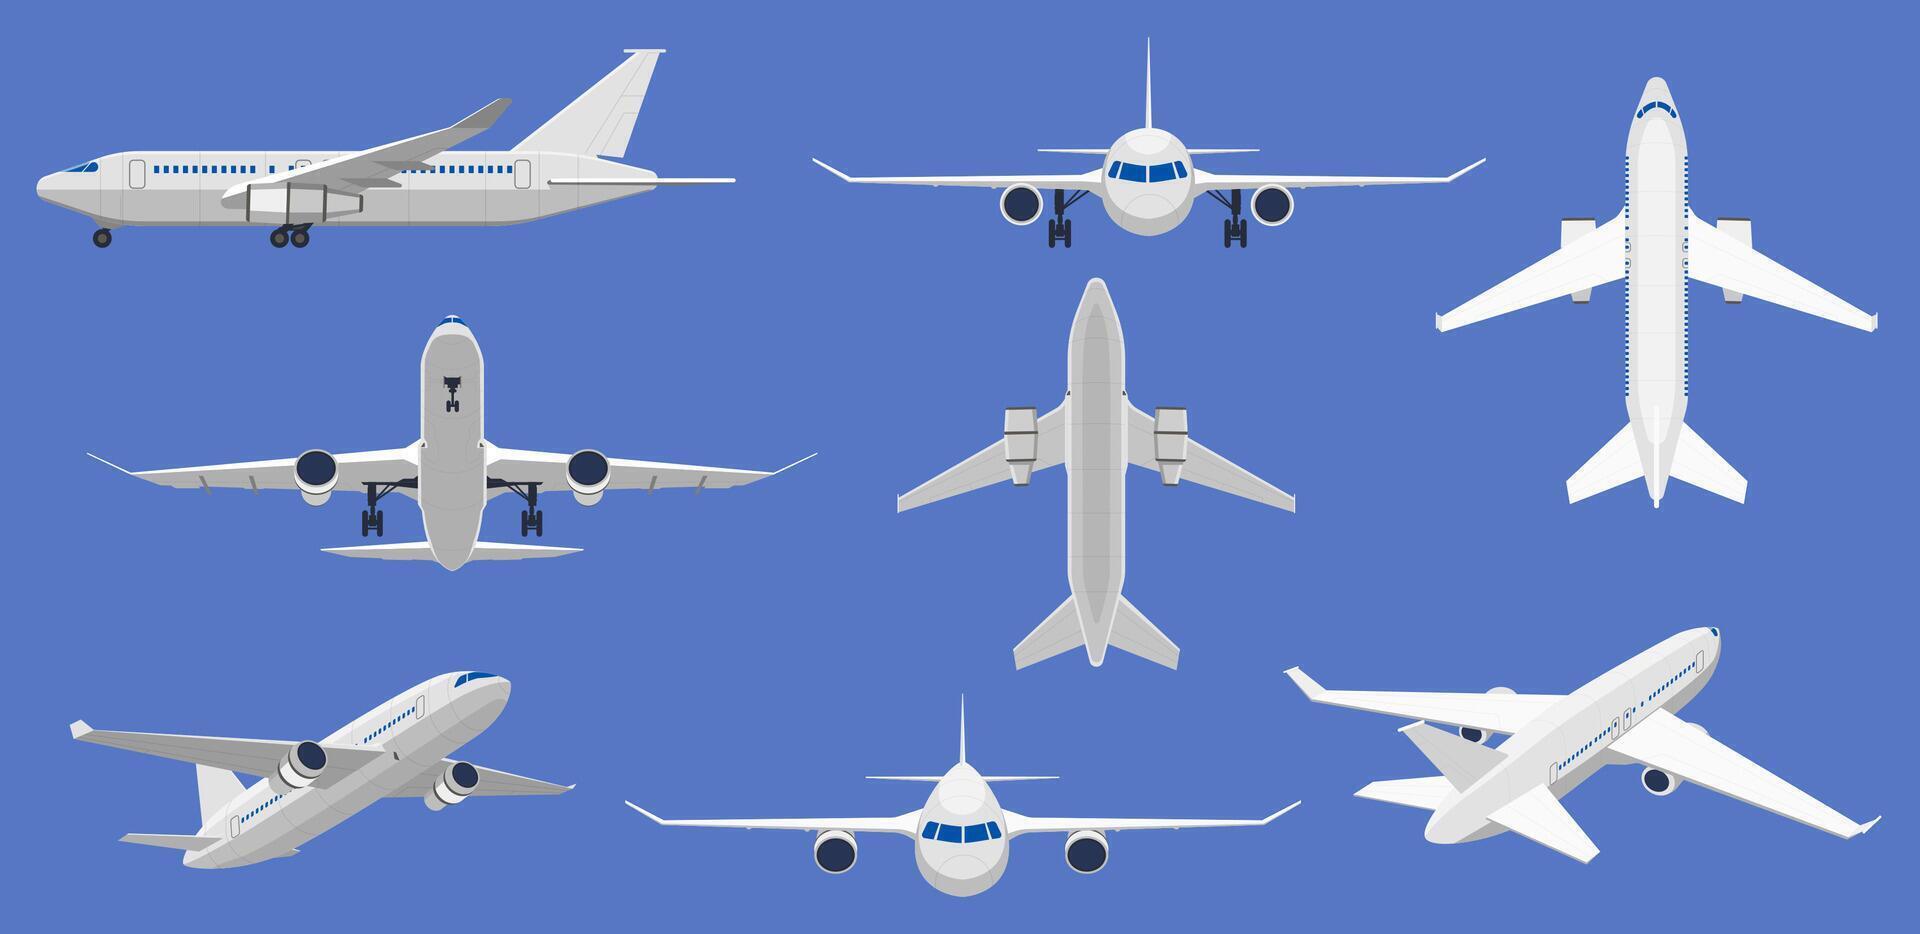 Airplane flight. Aircraft plane in front, side and top view, passenger plane or cargo service aircraft. Flying airplane isolated vector illustrations